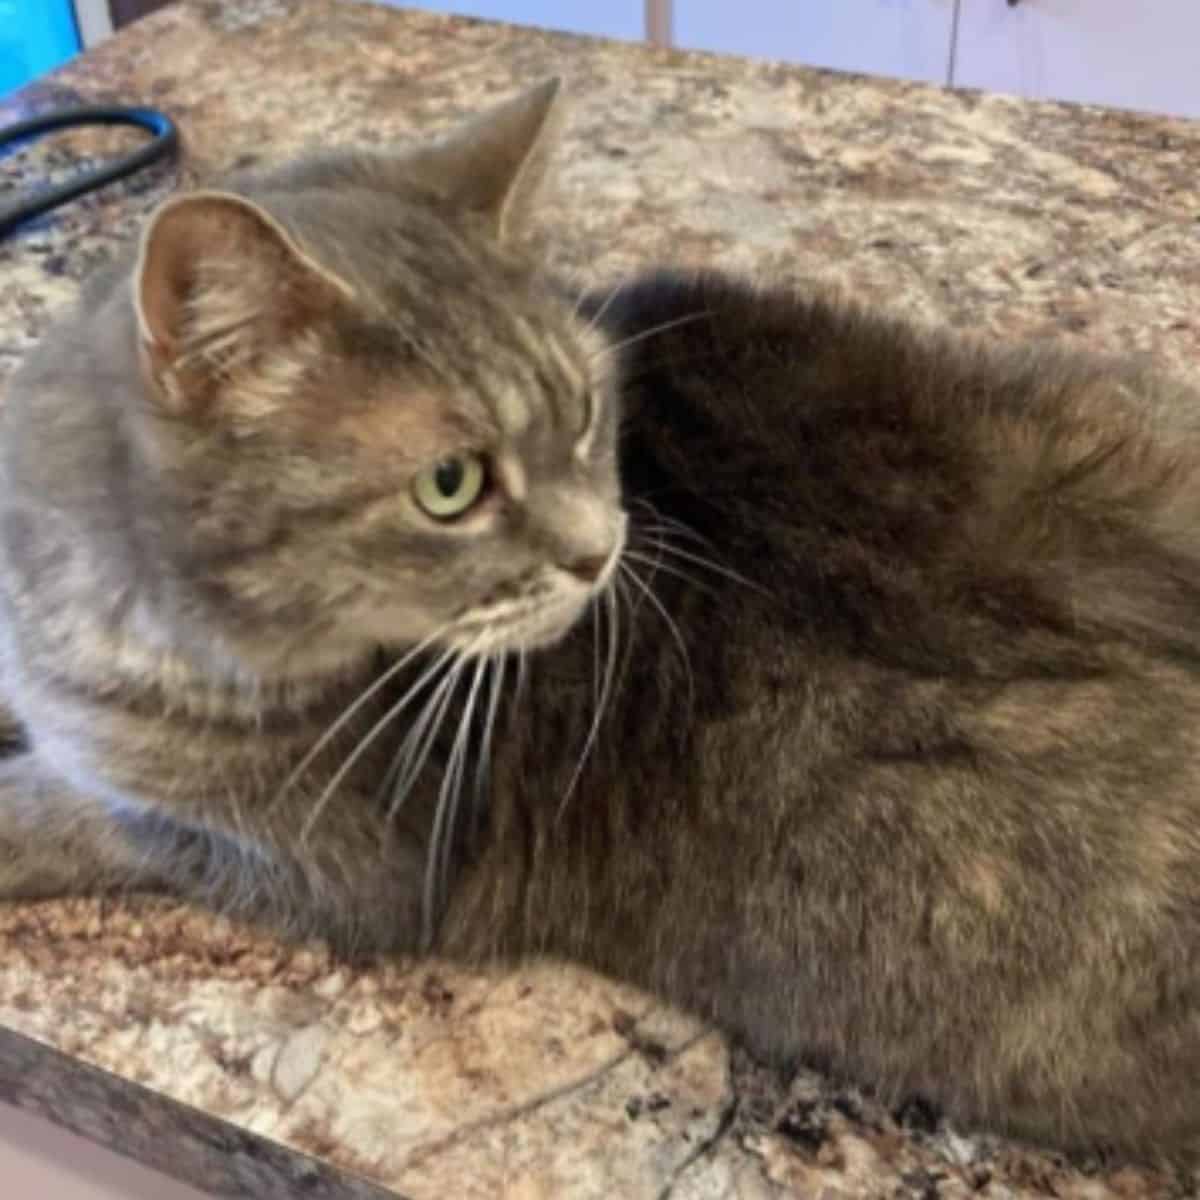 ashes, the cat who was found thanks to a microchip